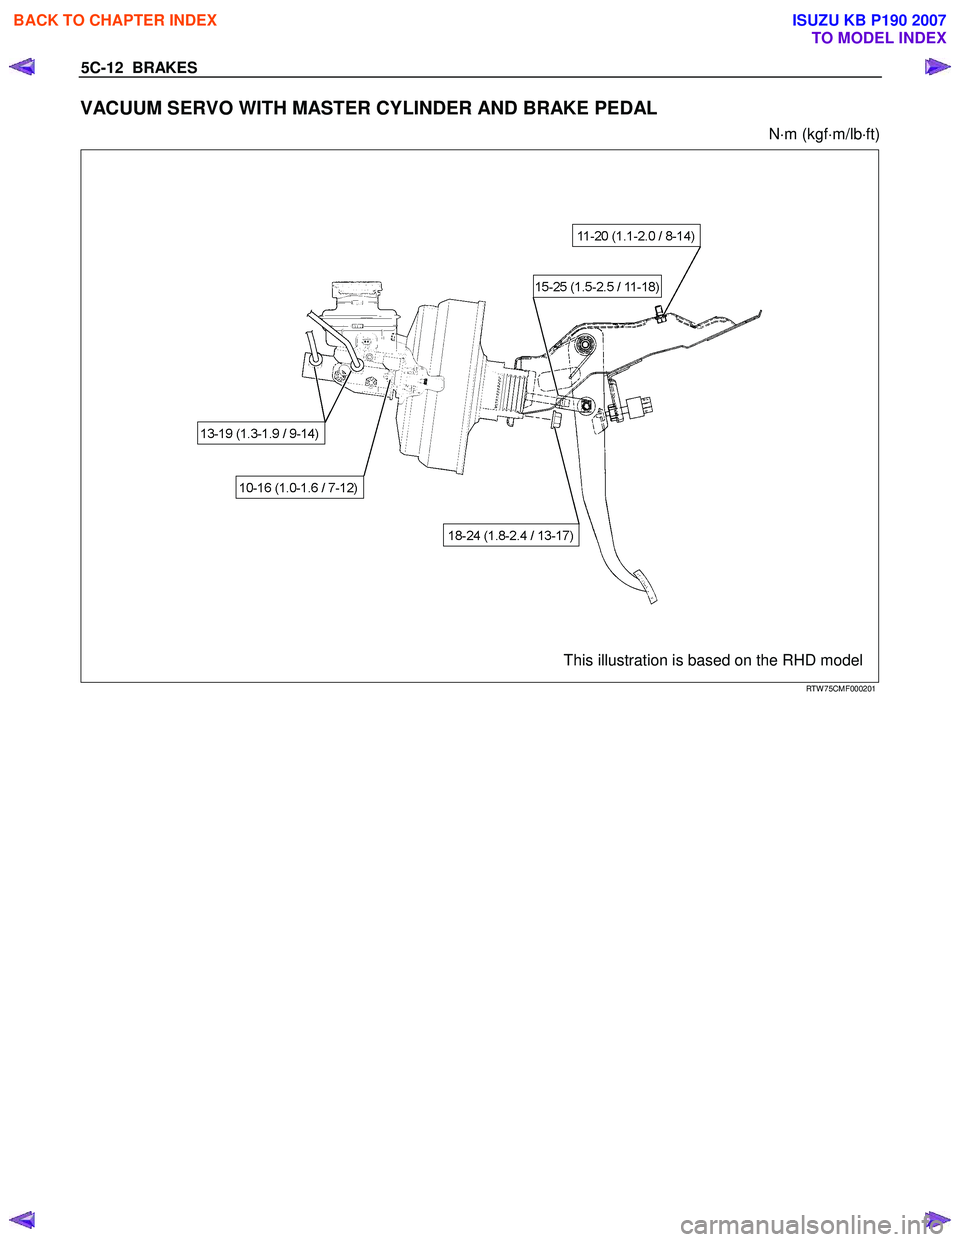 ISUZU KB P190 2007  Workshop Repair Manual 5C-12  BRAKES 
VACUUM SERVO WITH MASTER CYLINDER AND BRAKE PEDAL  
 
N ⋅m (kgf ⋅m/lb ⋅ft) 
 
  
 
 
 
 
This illustration is based on the RHD model  
RTW 75CMF000201 
 
 
BACK TO CHAPTER INDEX
T